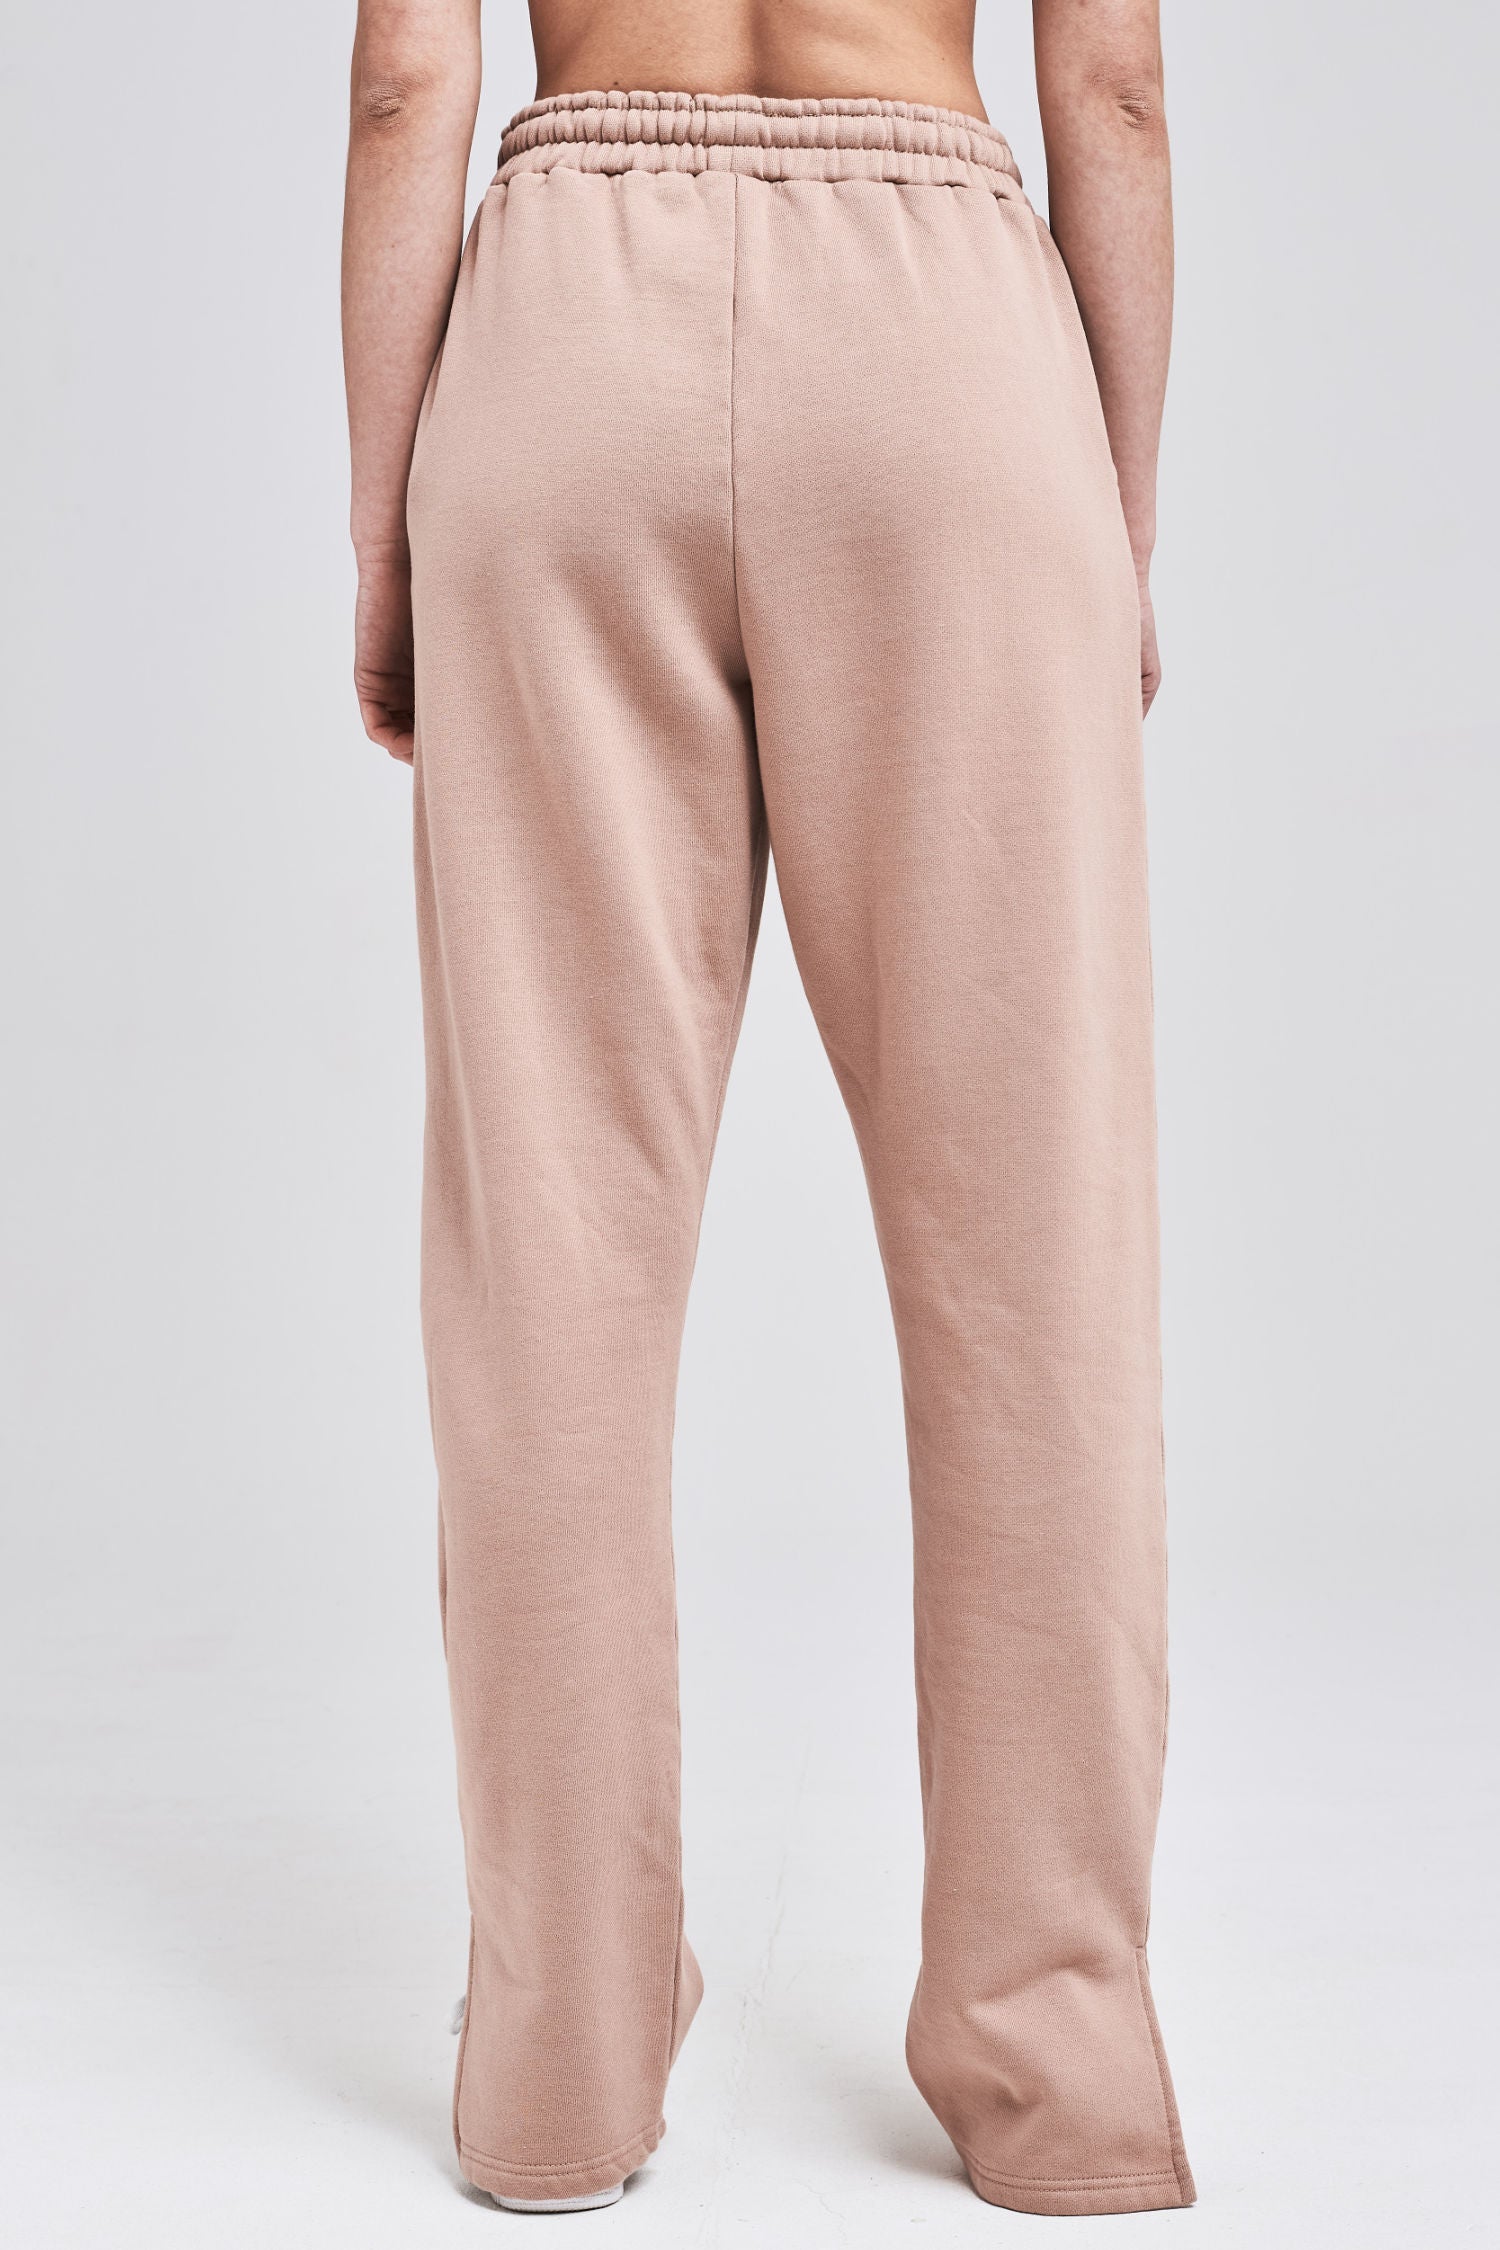 Evie Straight Sweat Pants Washed Rose Bottoms | Women Life We Chose Female 